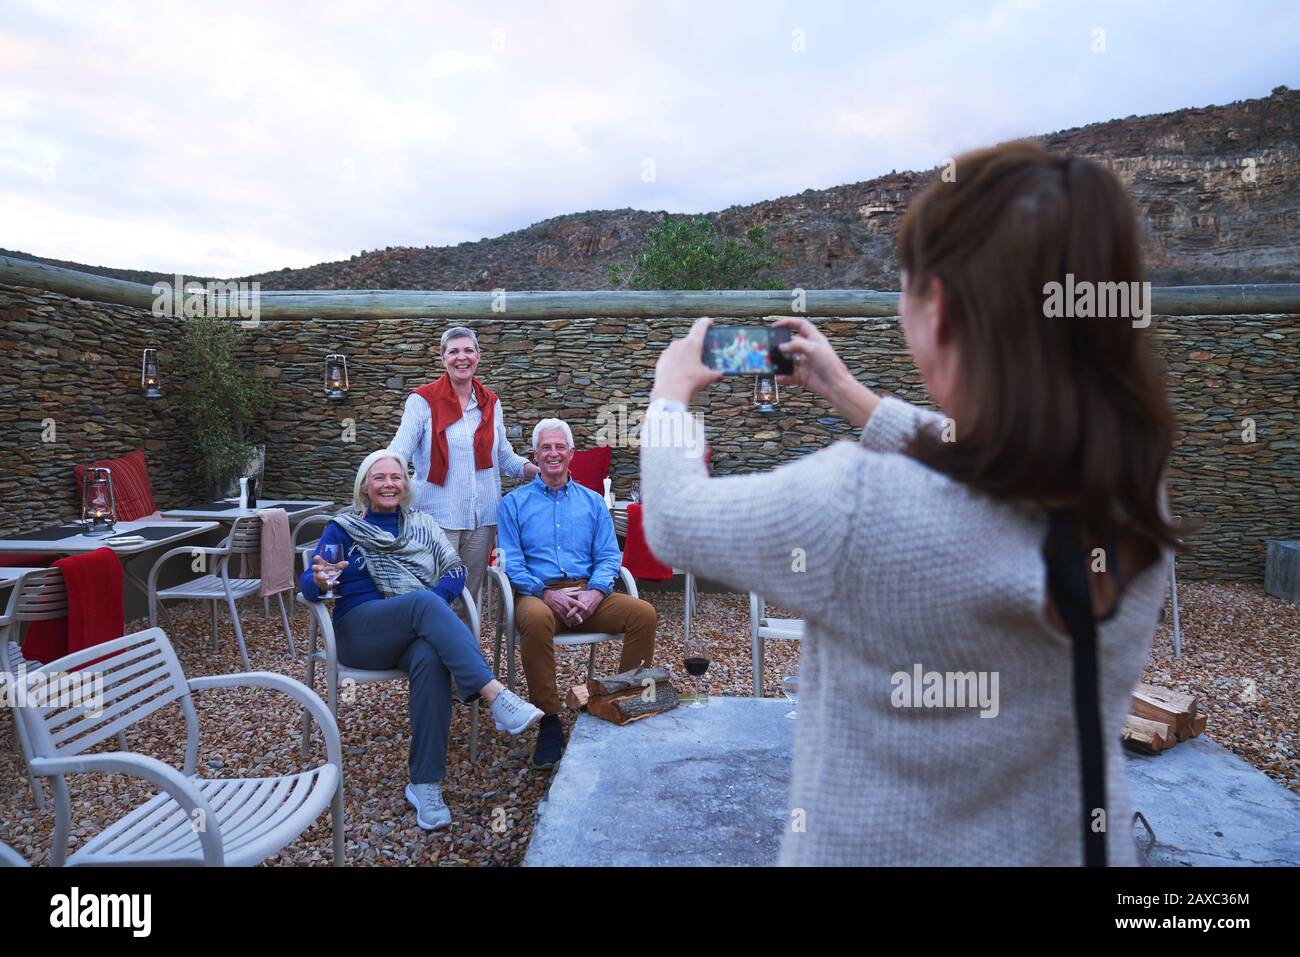 Woman with camera phone photographing senior friends on patio Stock Photo